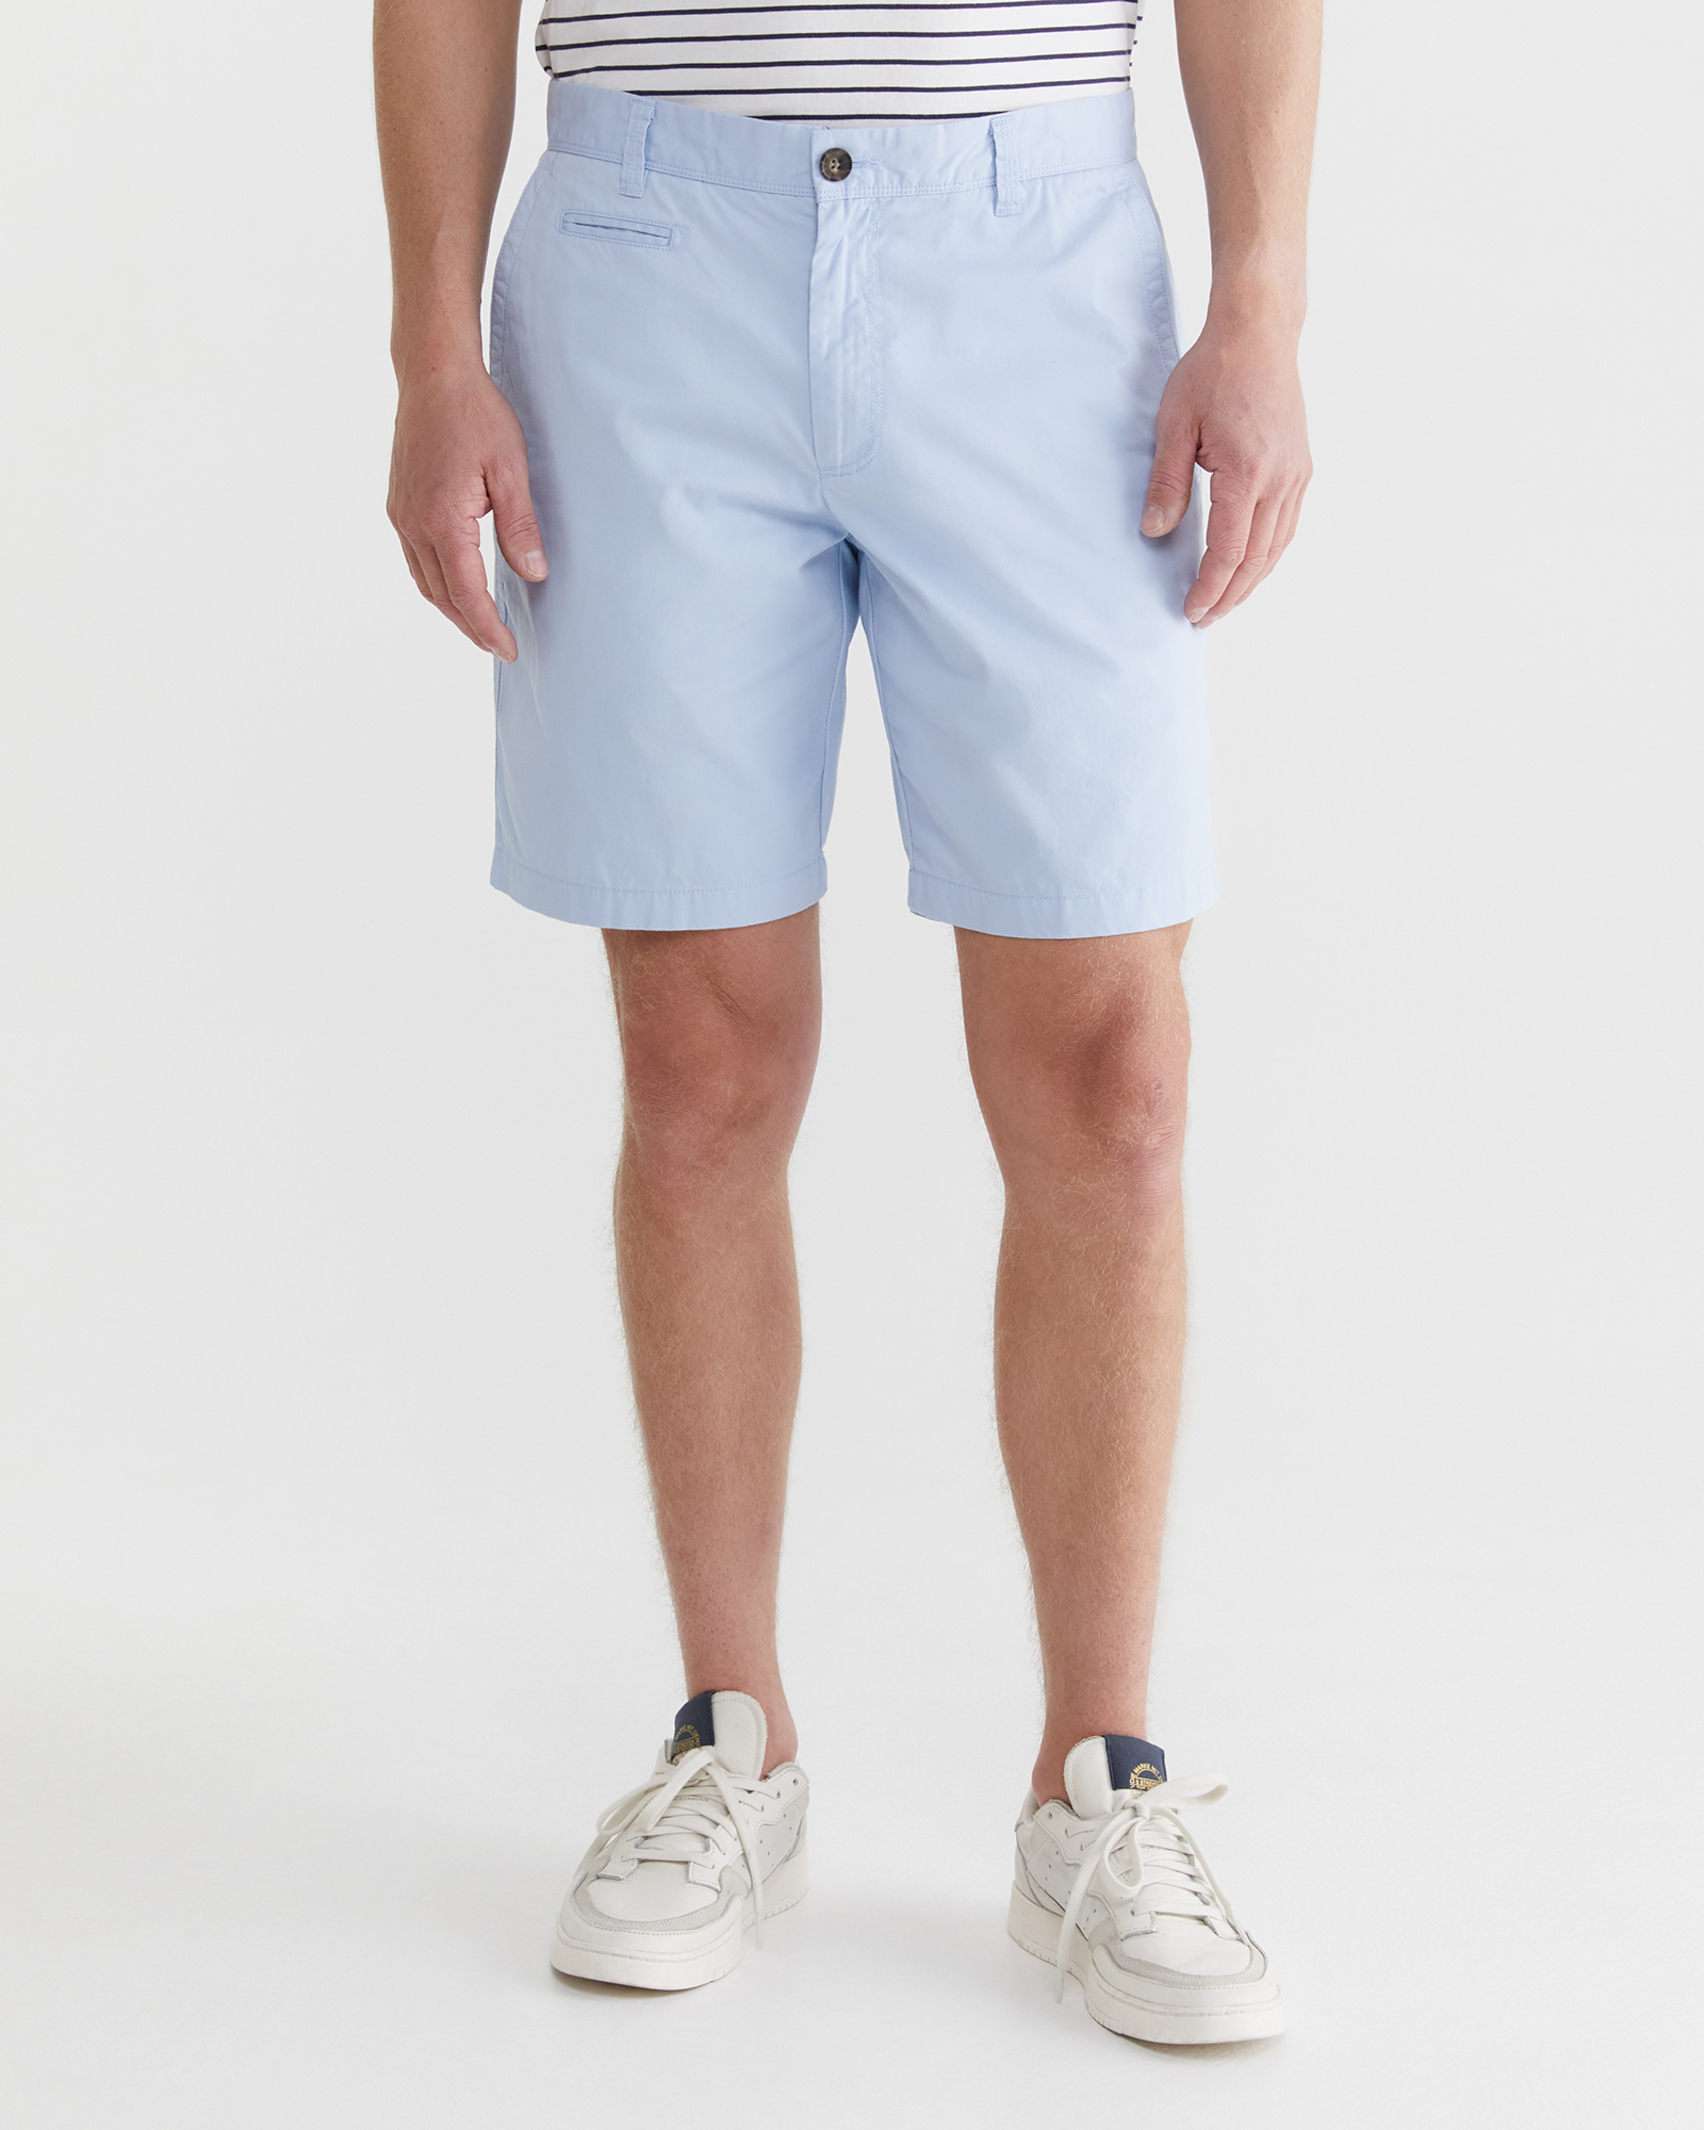 Classic Chino Short in FROST BLUE